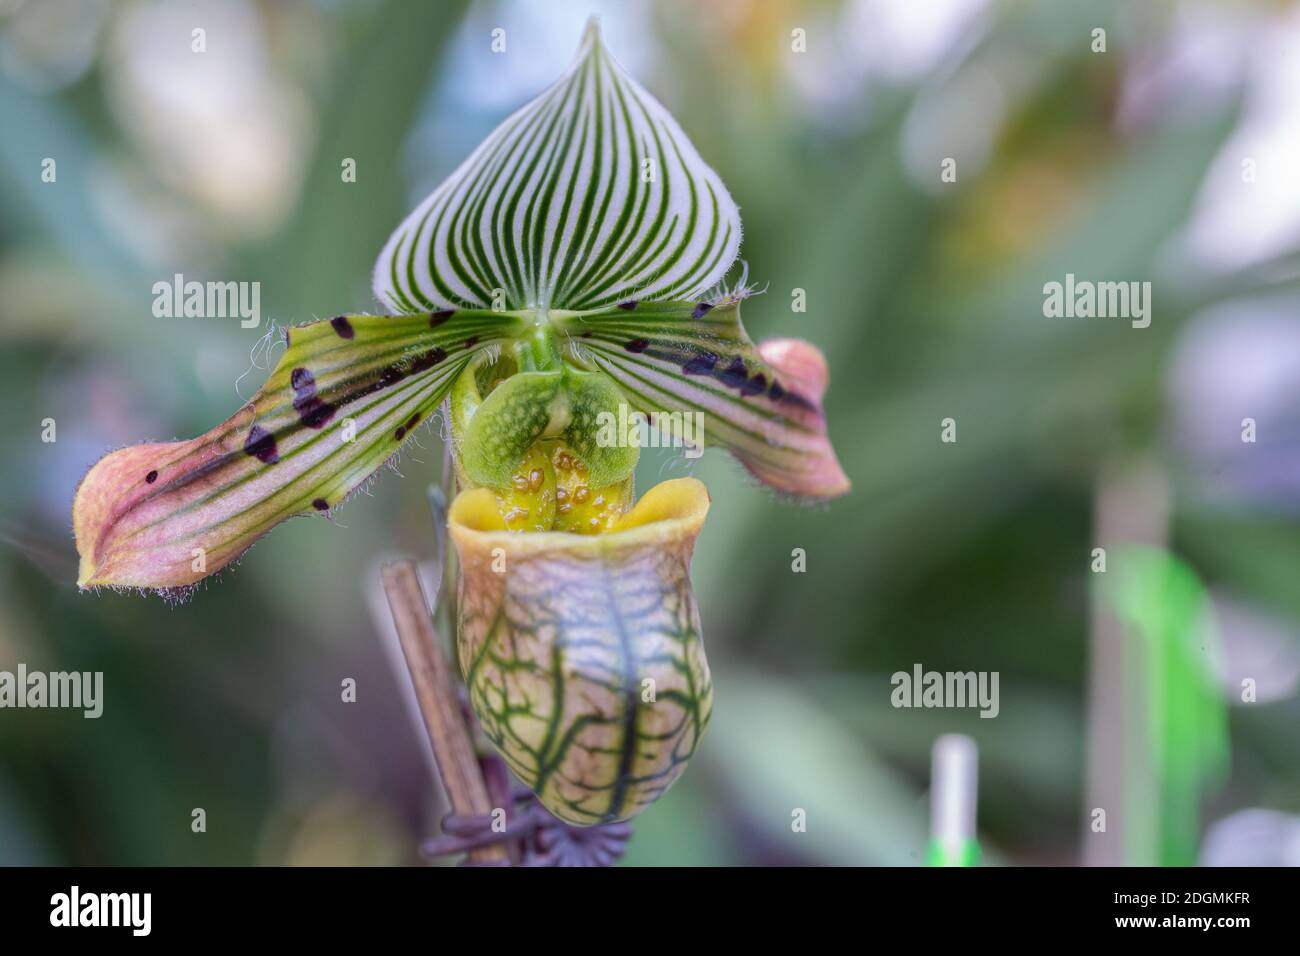 Orchid flowers in the garden. Paphiopedilum Orchidaceae. or Lady's Slipper. Stock Photo